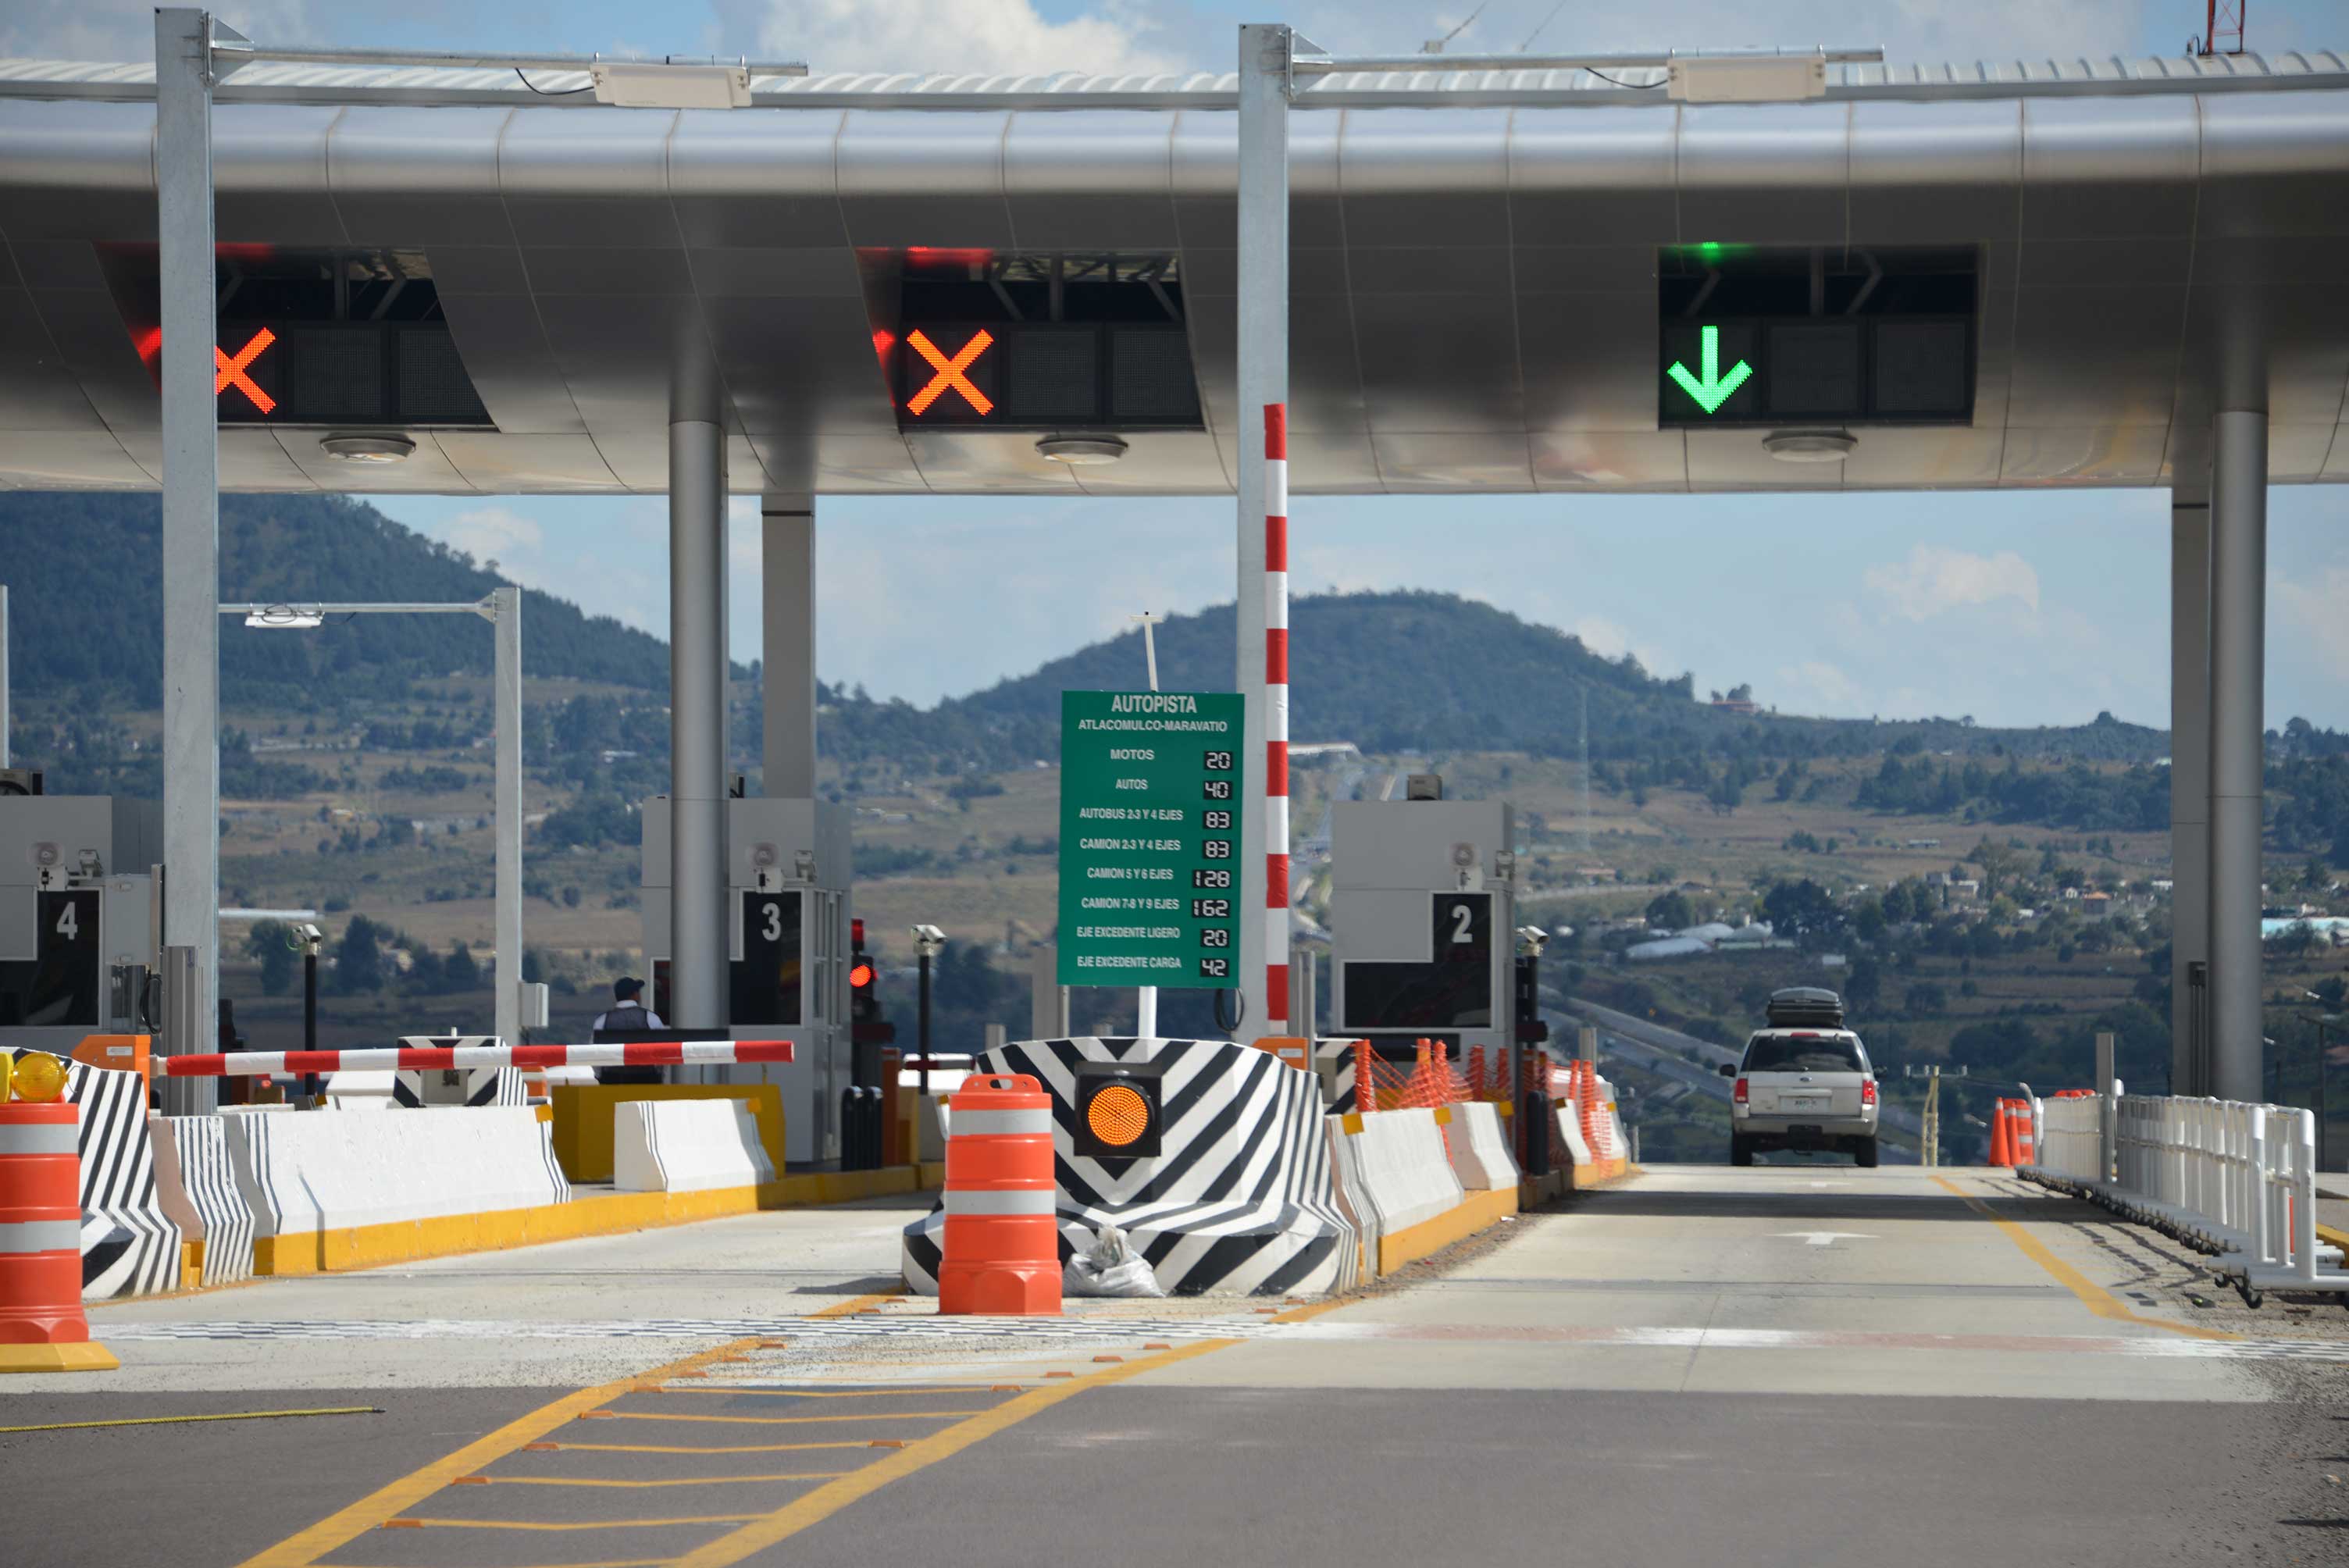 Toll, electronic toll, ITS and communication systems for the Atlacomulco-Maravatío stretch of road in Mexico